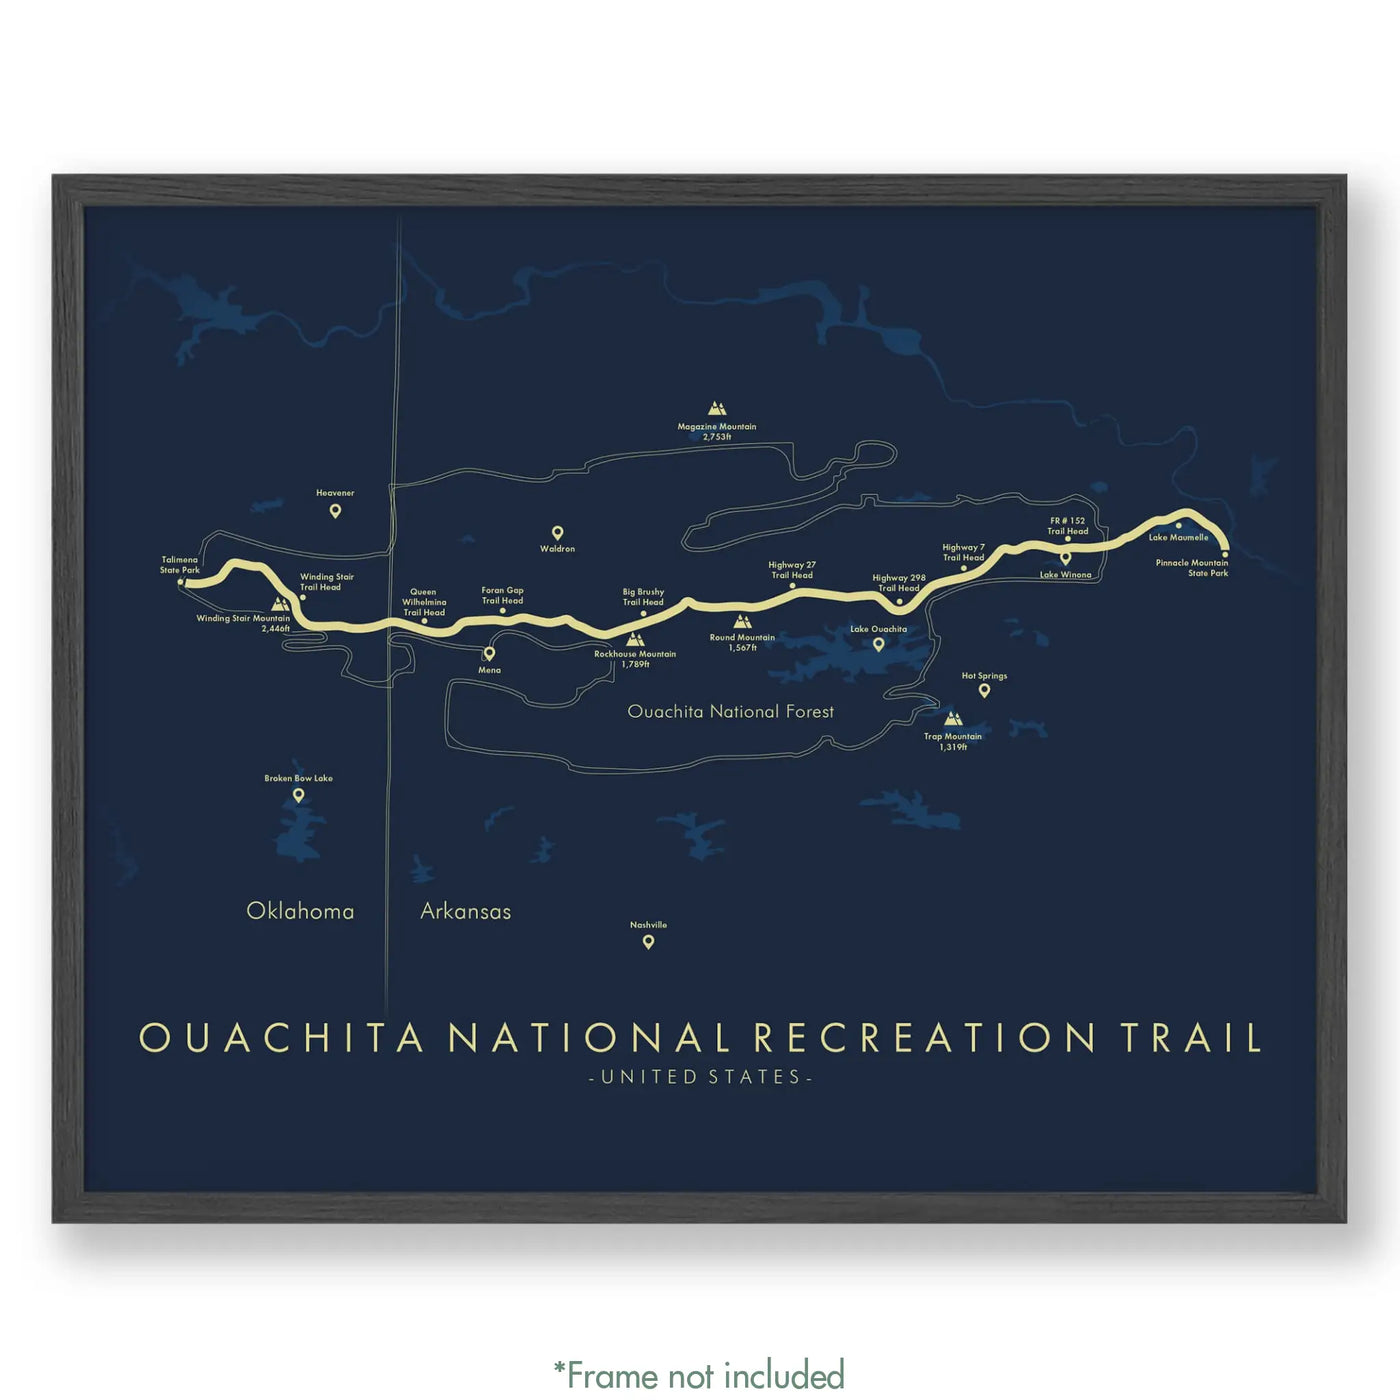 Trail Poster of Ouachita National Recreation Trail - Blue